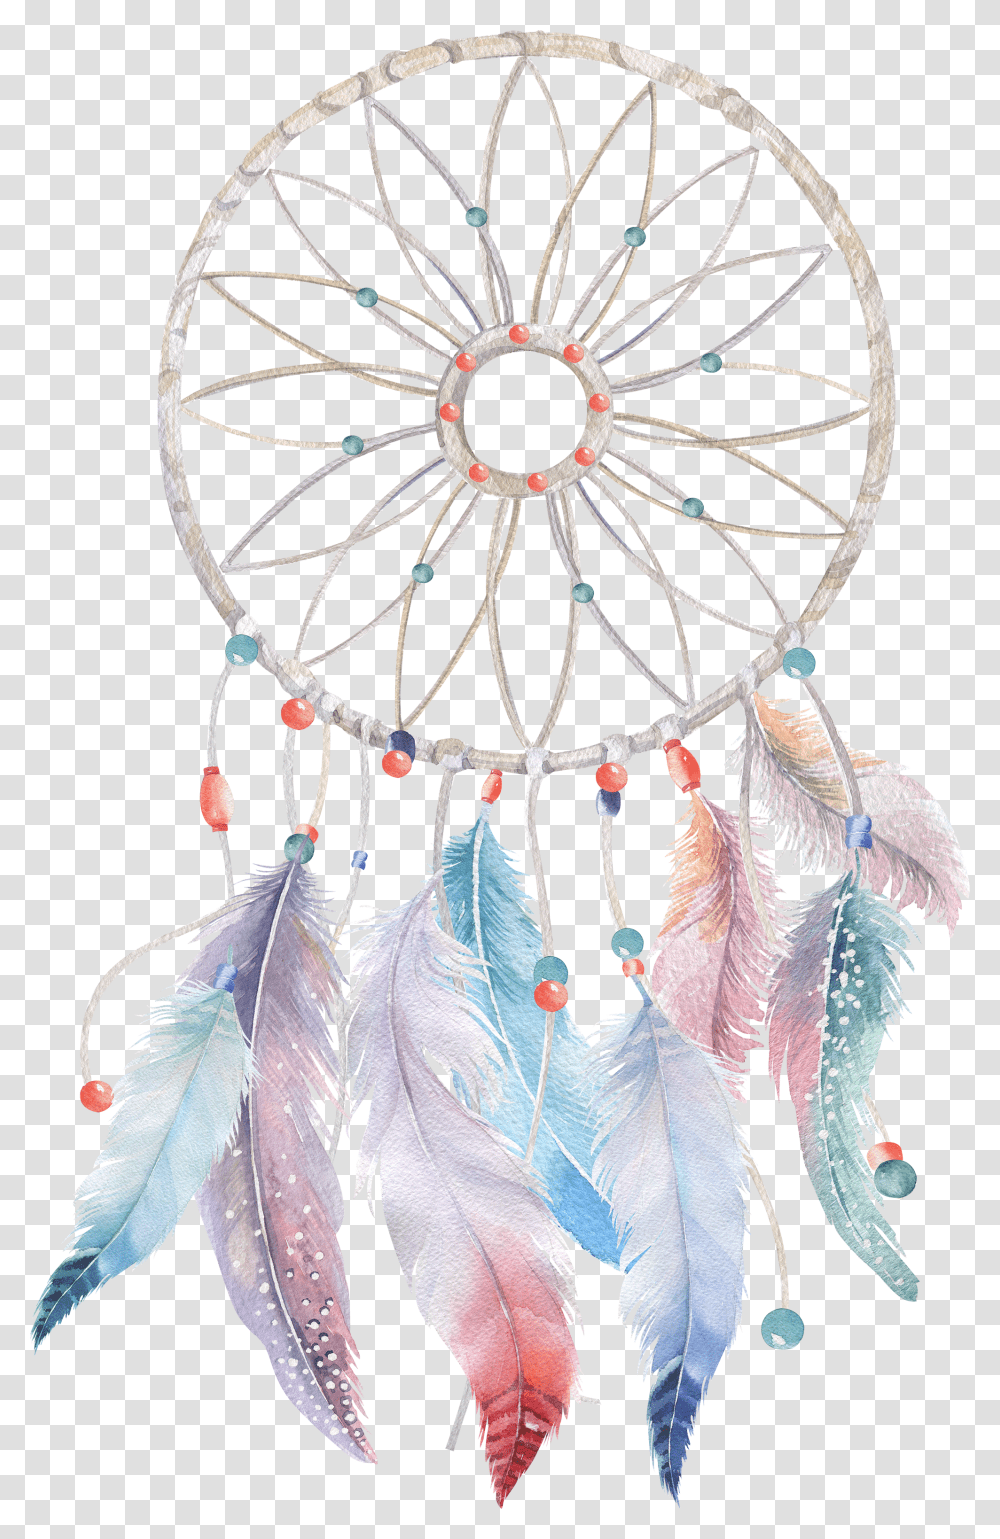 Download Watercolor Feather Boho Chic Painting Dreamcatcher Transparent Png